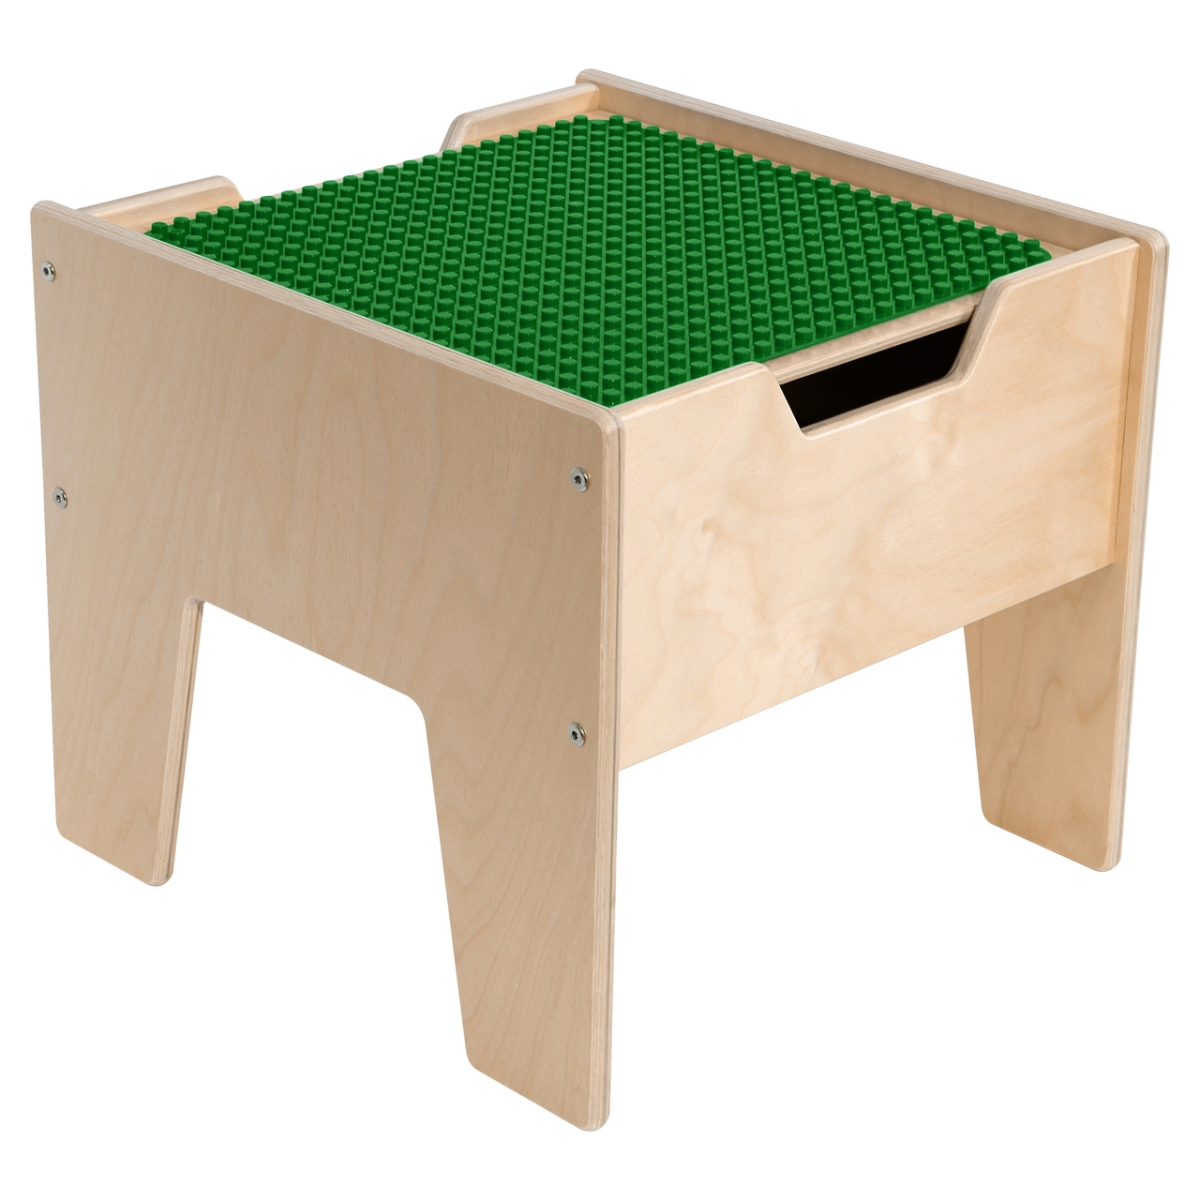 C991300-pg 2-n-1 Activity Table With Green Duplo Compatible Top - Rta